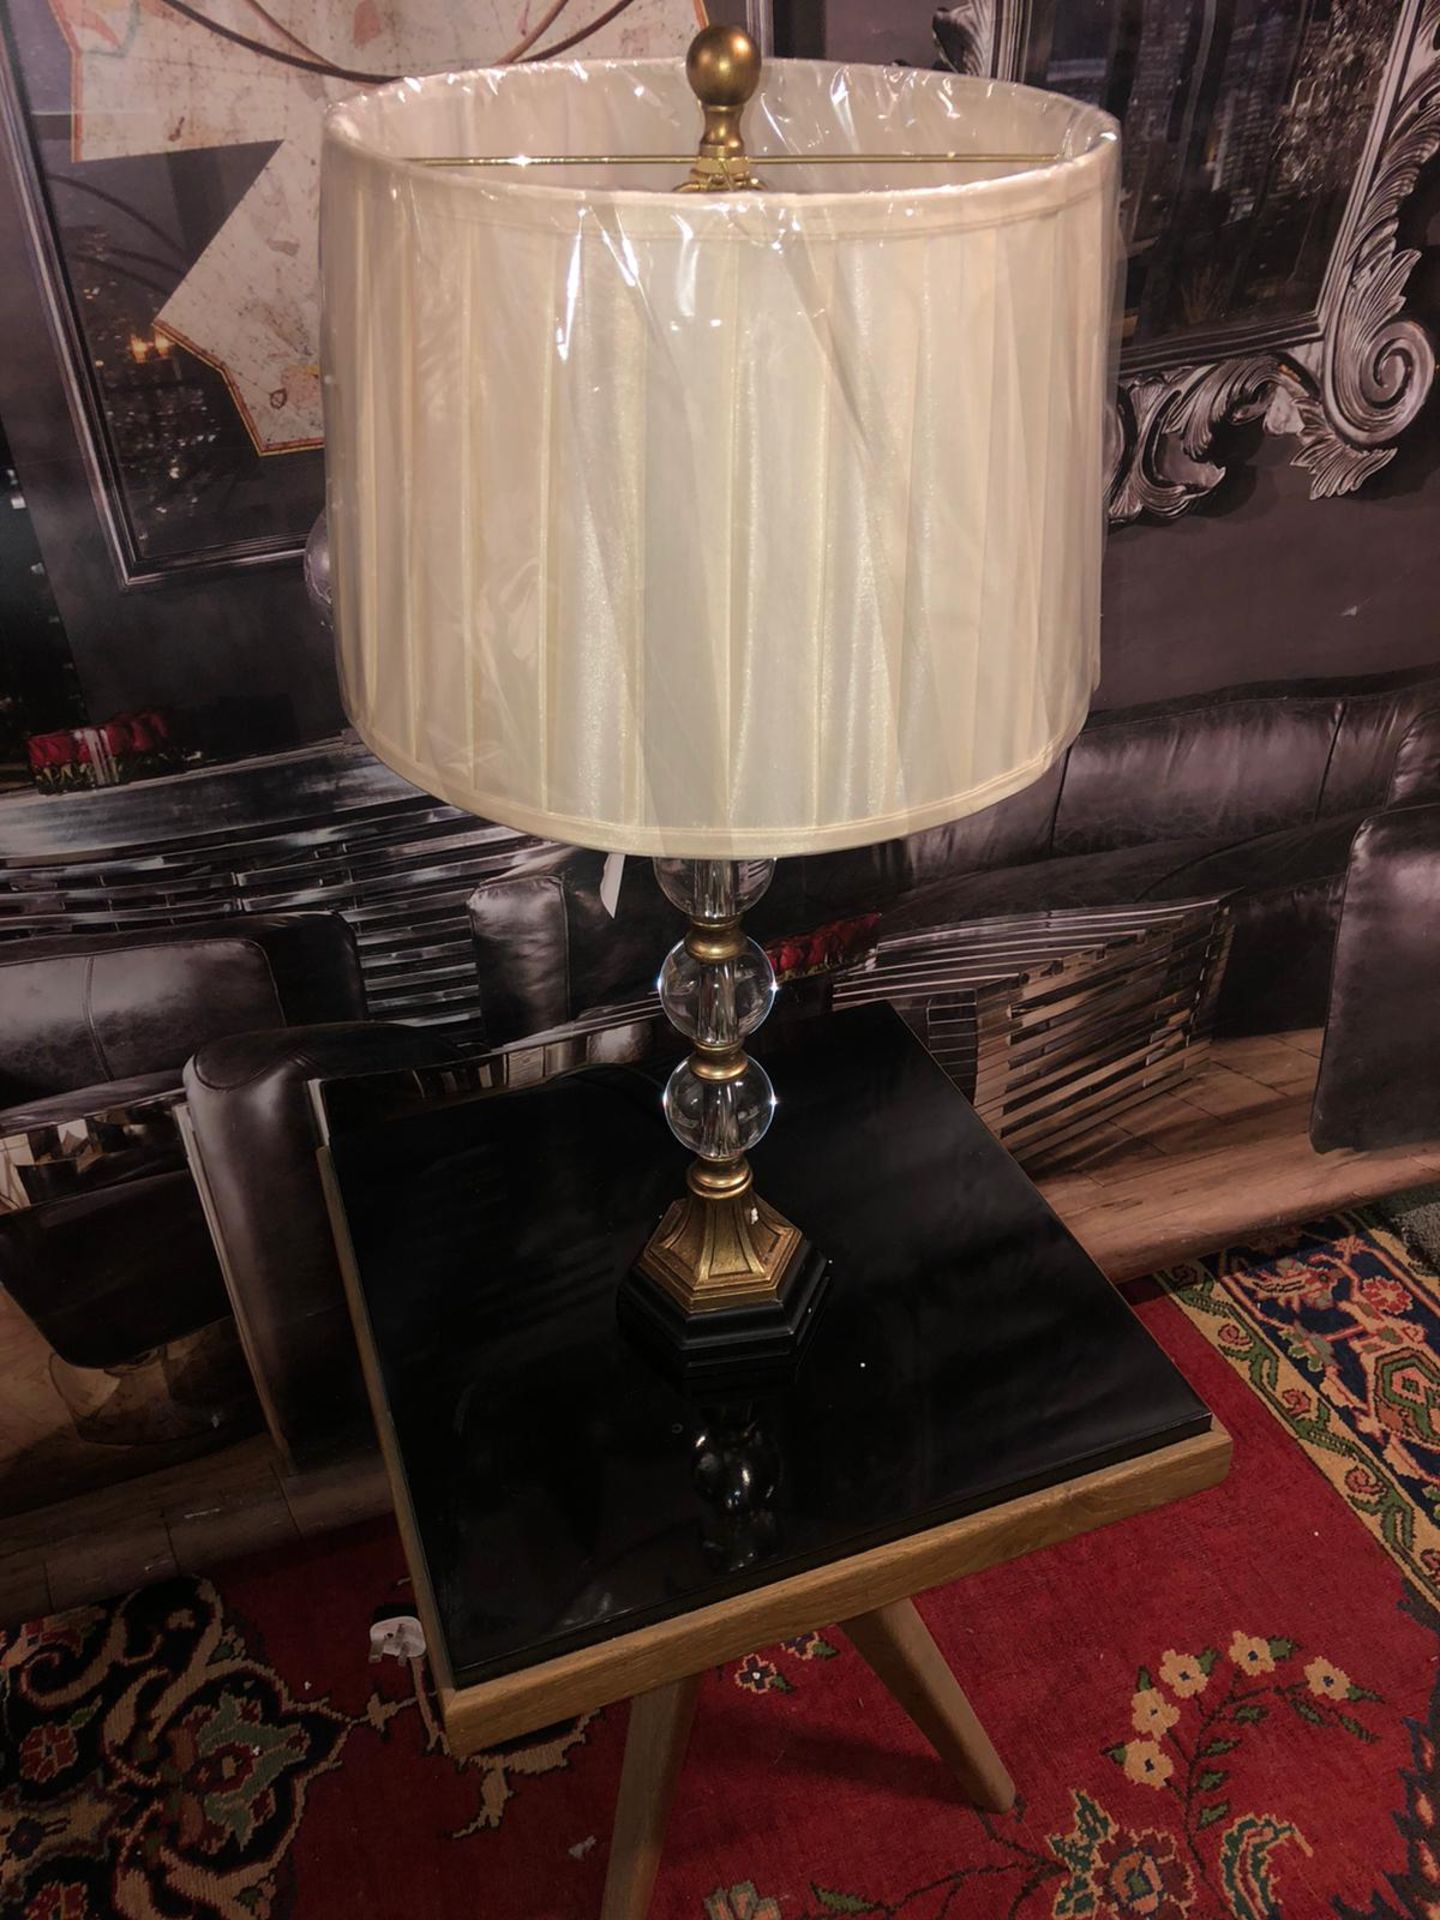 Crystal Ball Table Lamp add elegance and beauty to your room. It is a great addition to any - Image 5 of 6